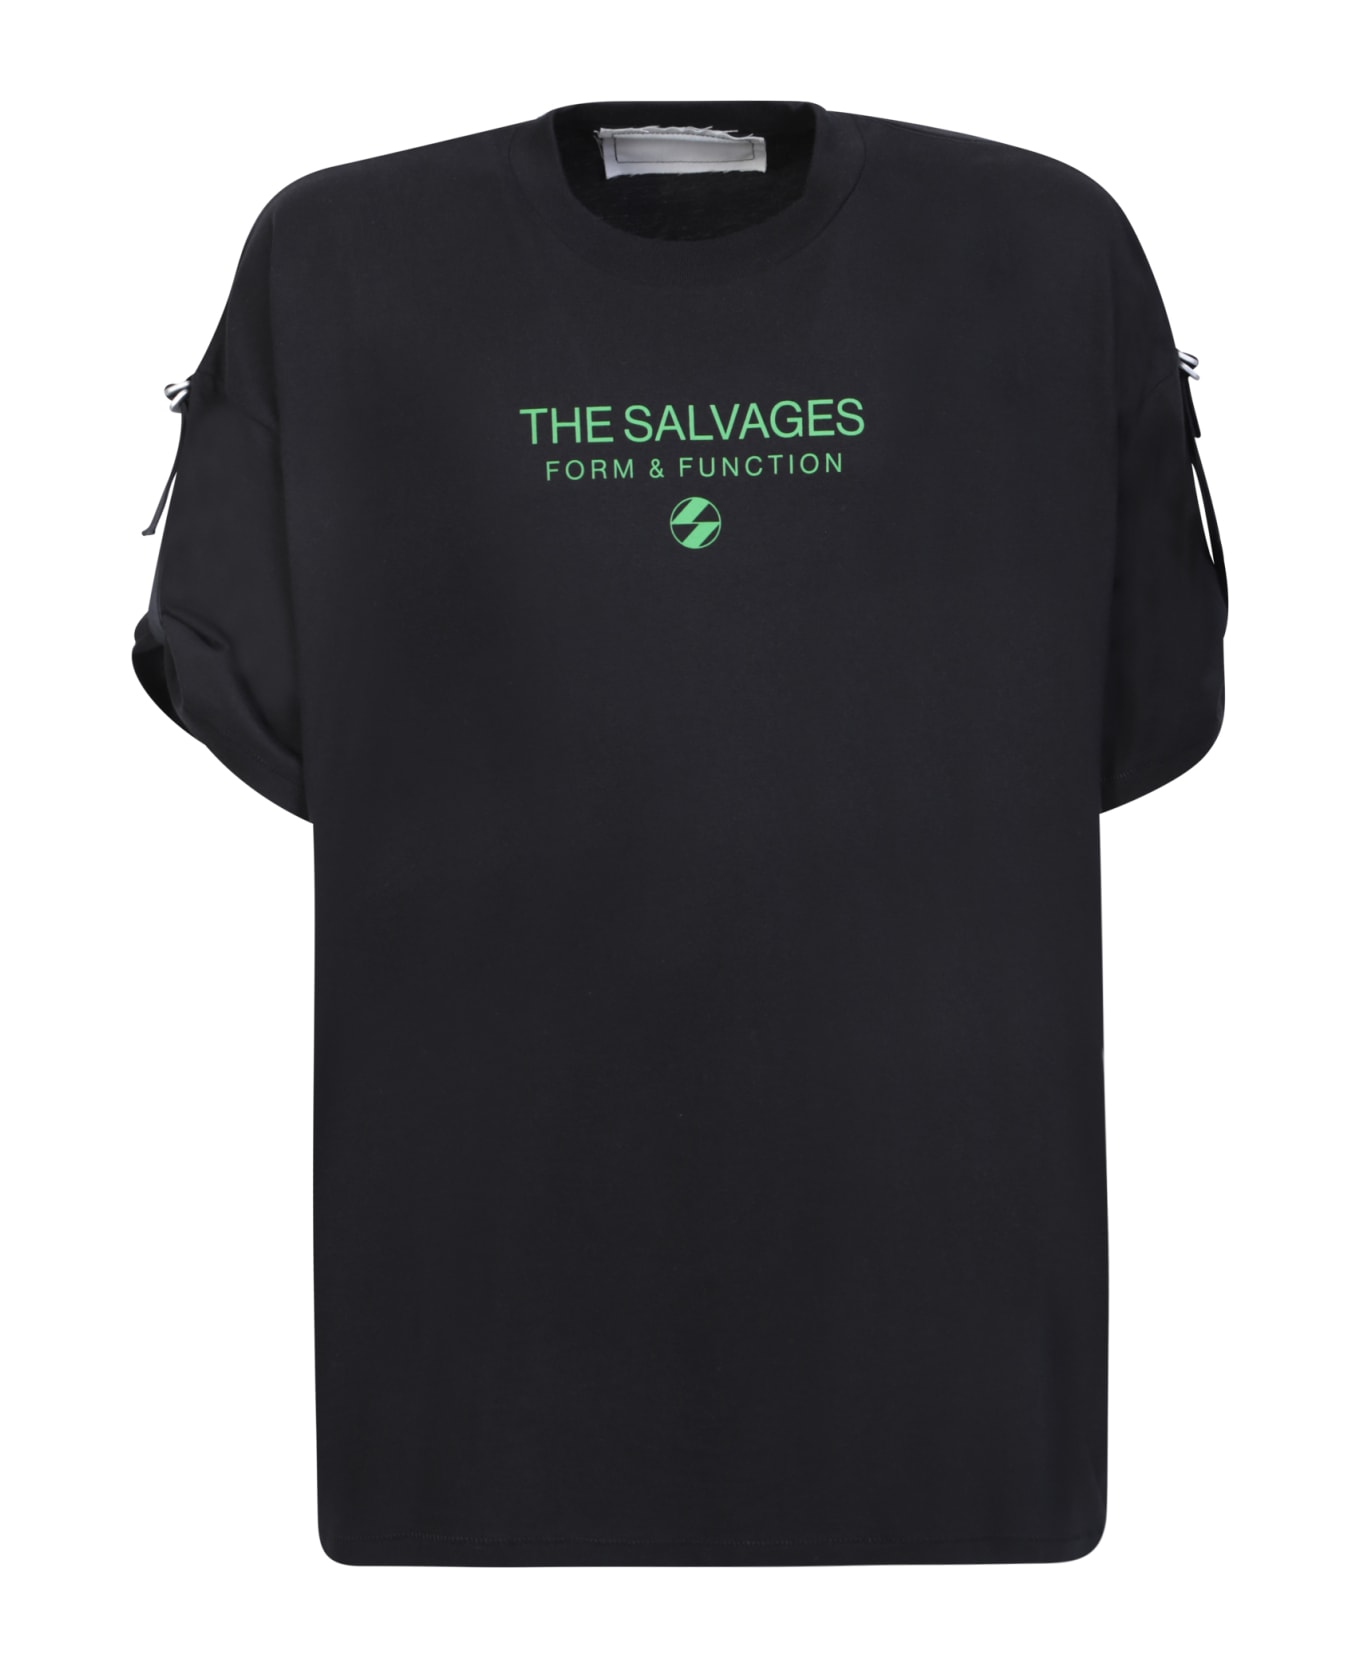 The Salvages From & Function D-ring Black T-shirt - Black